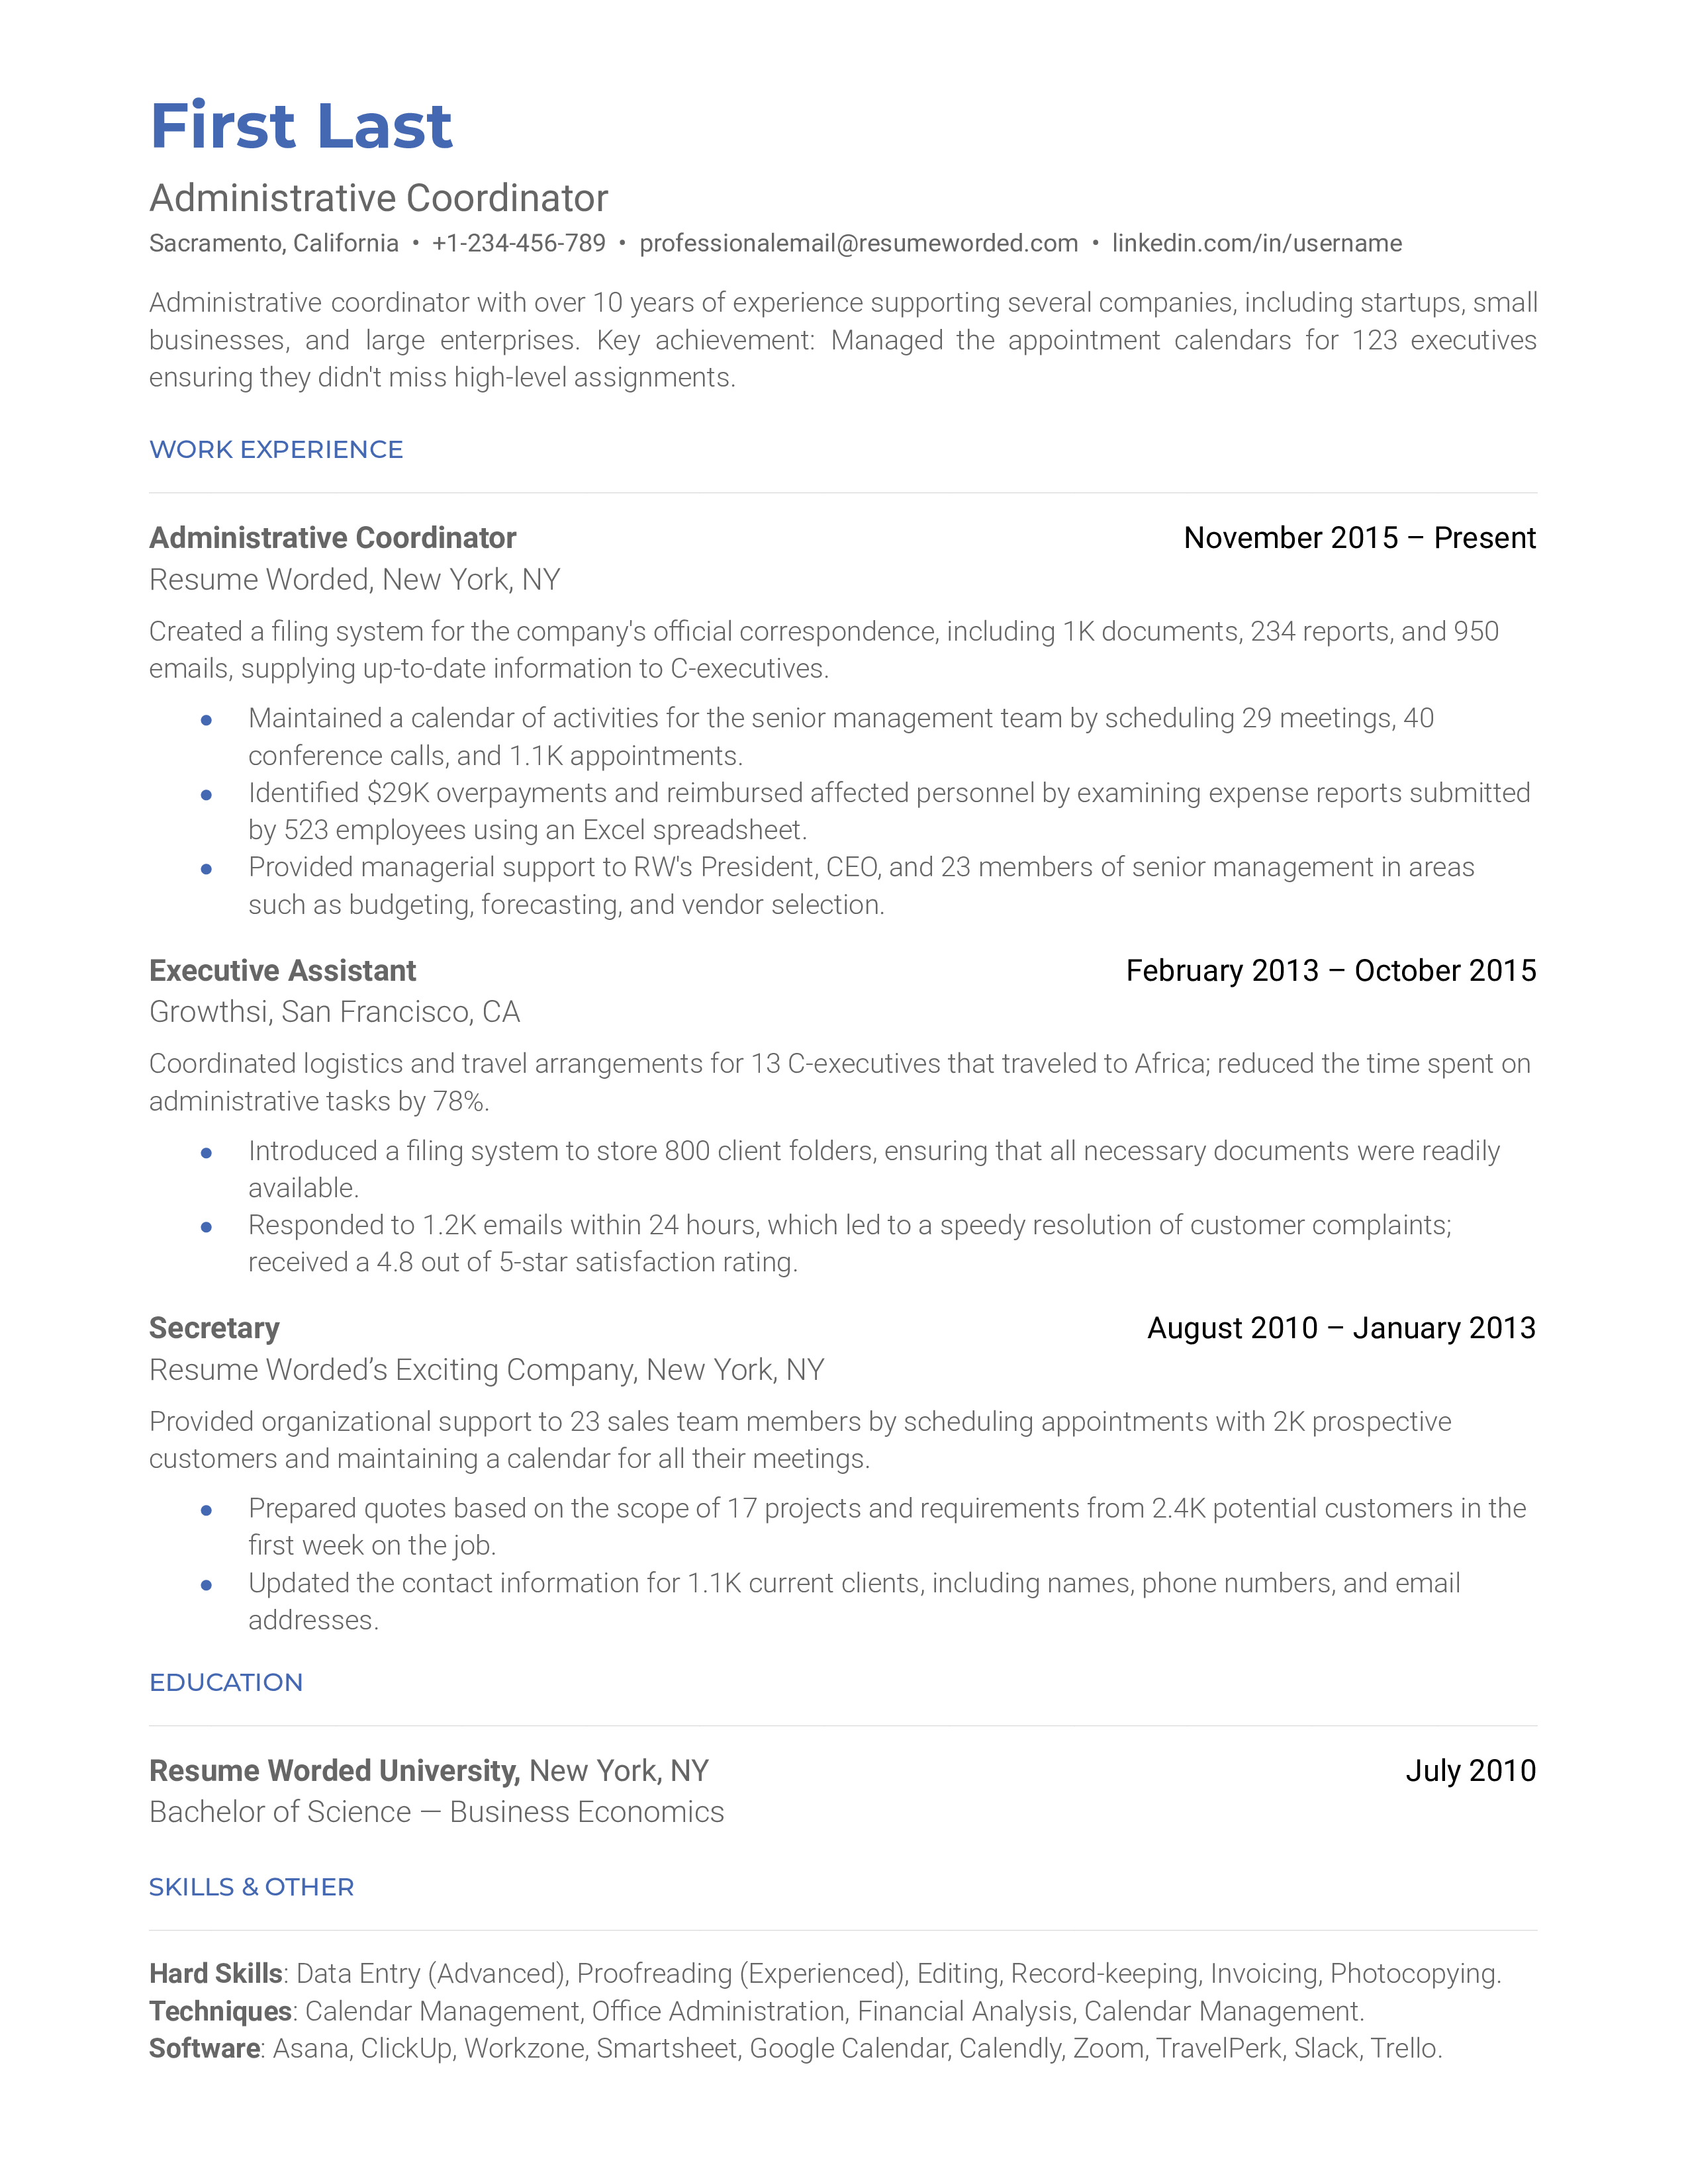 An administrative coordinator resume template that organizes work experience chronologically